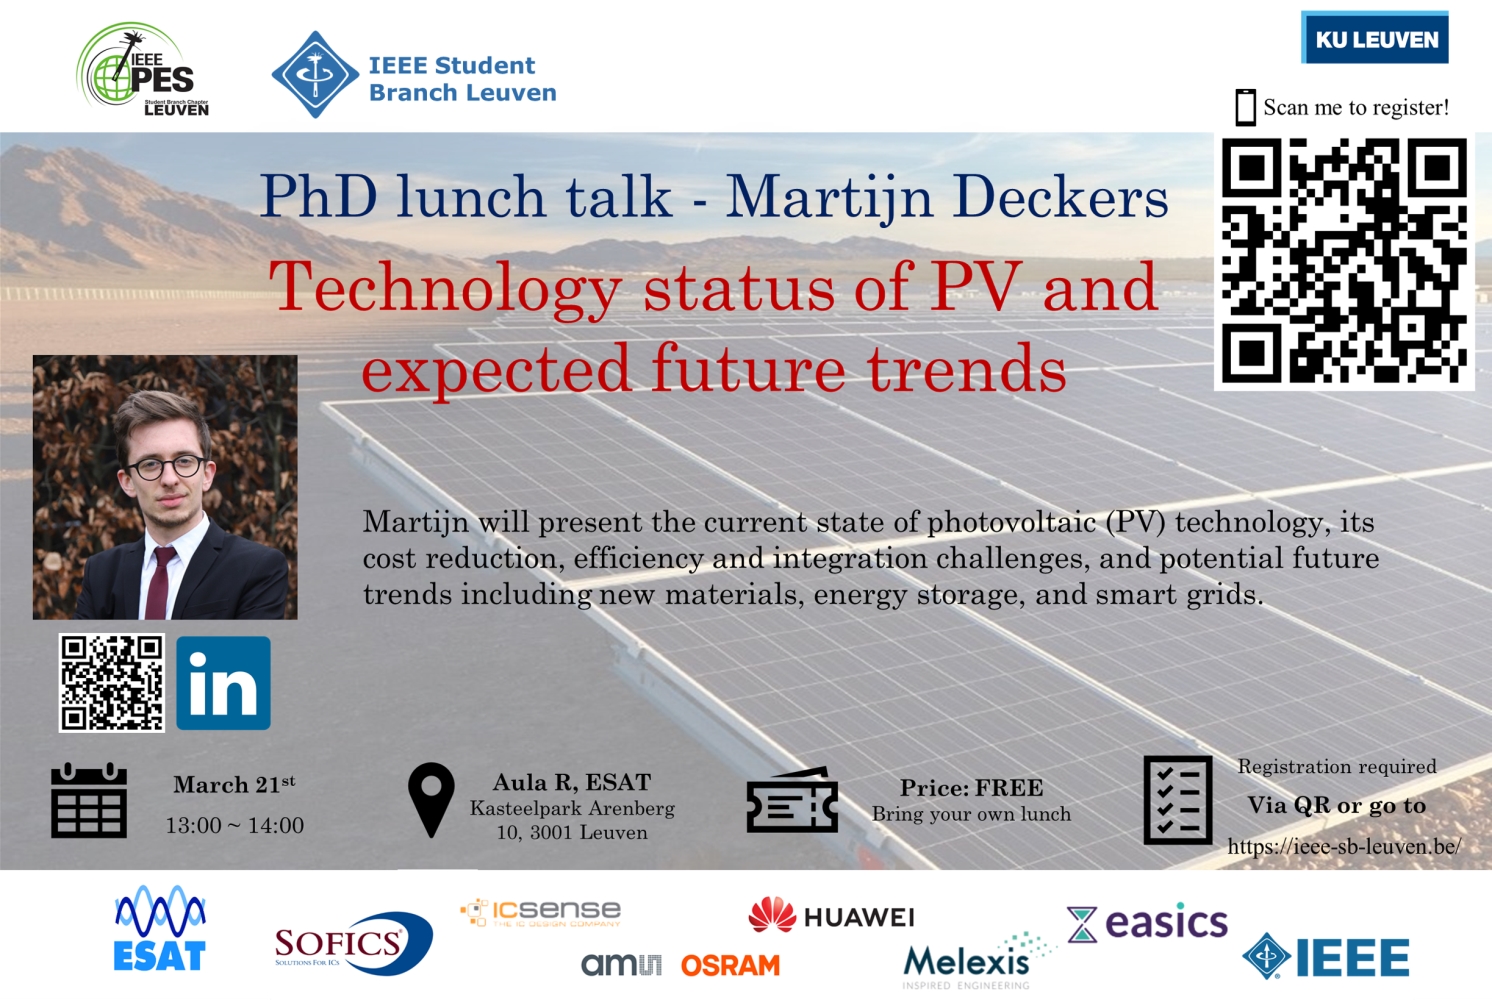 Poster of the PhD talk about the status of PV technology and trends.